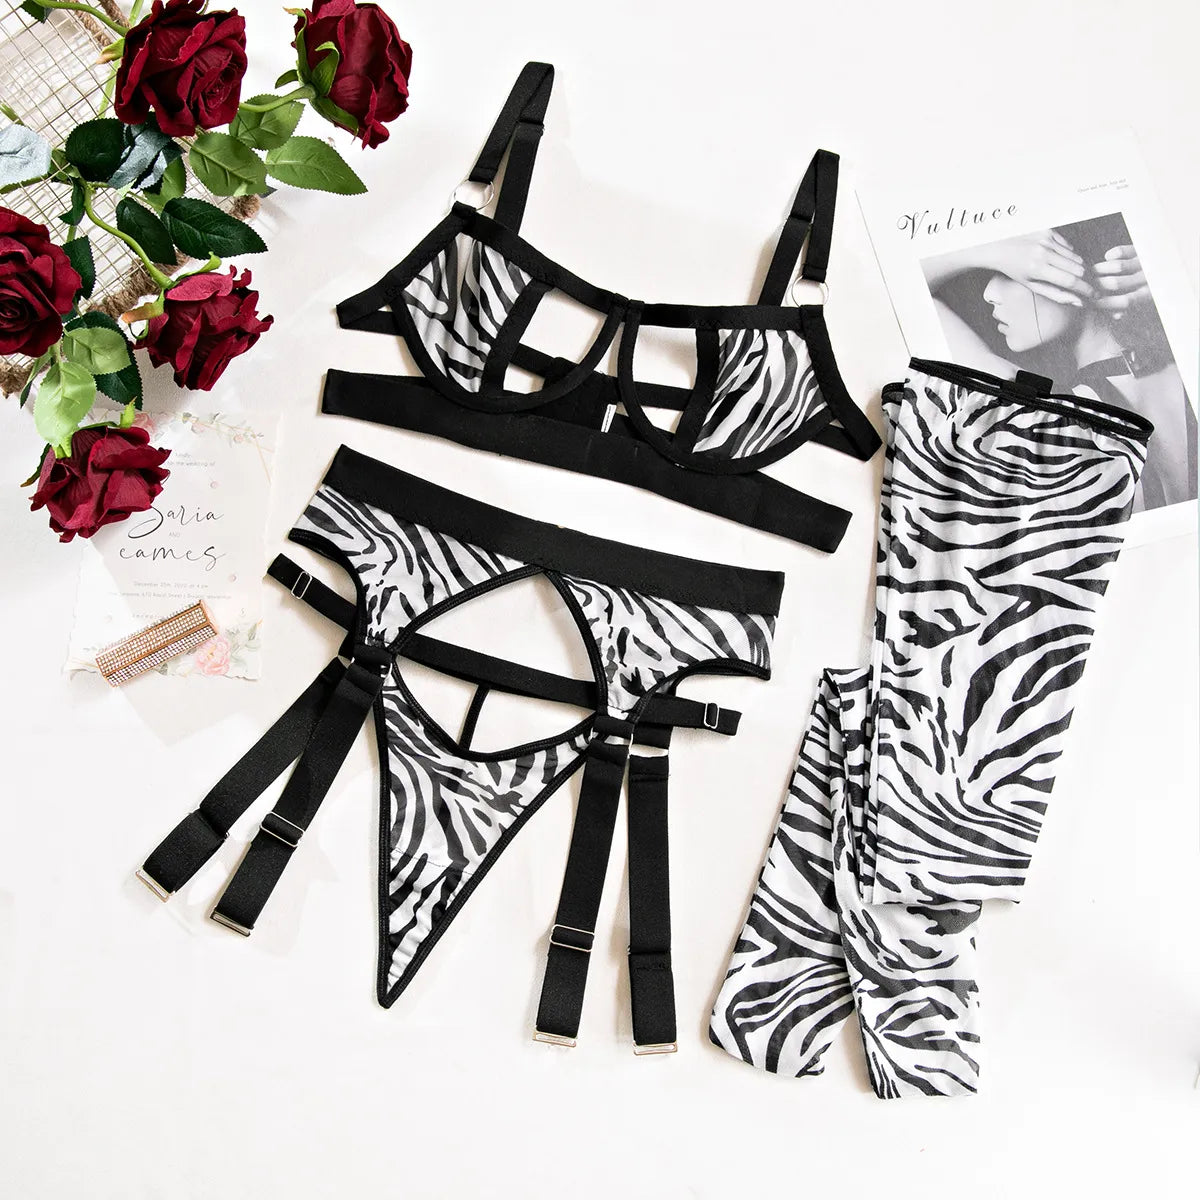 Zebra Sexy Stockings Lingerie Cup Out Bra Brazilian Intimate Set Fantasy Costume Matching G-String Outfits